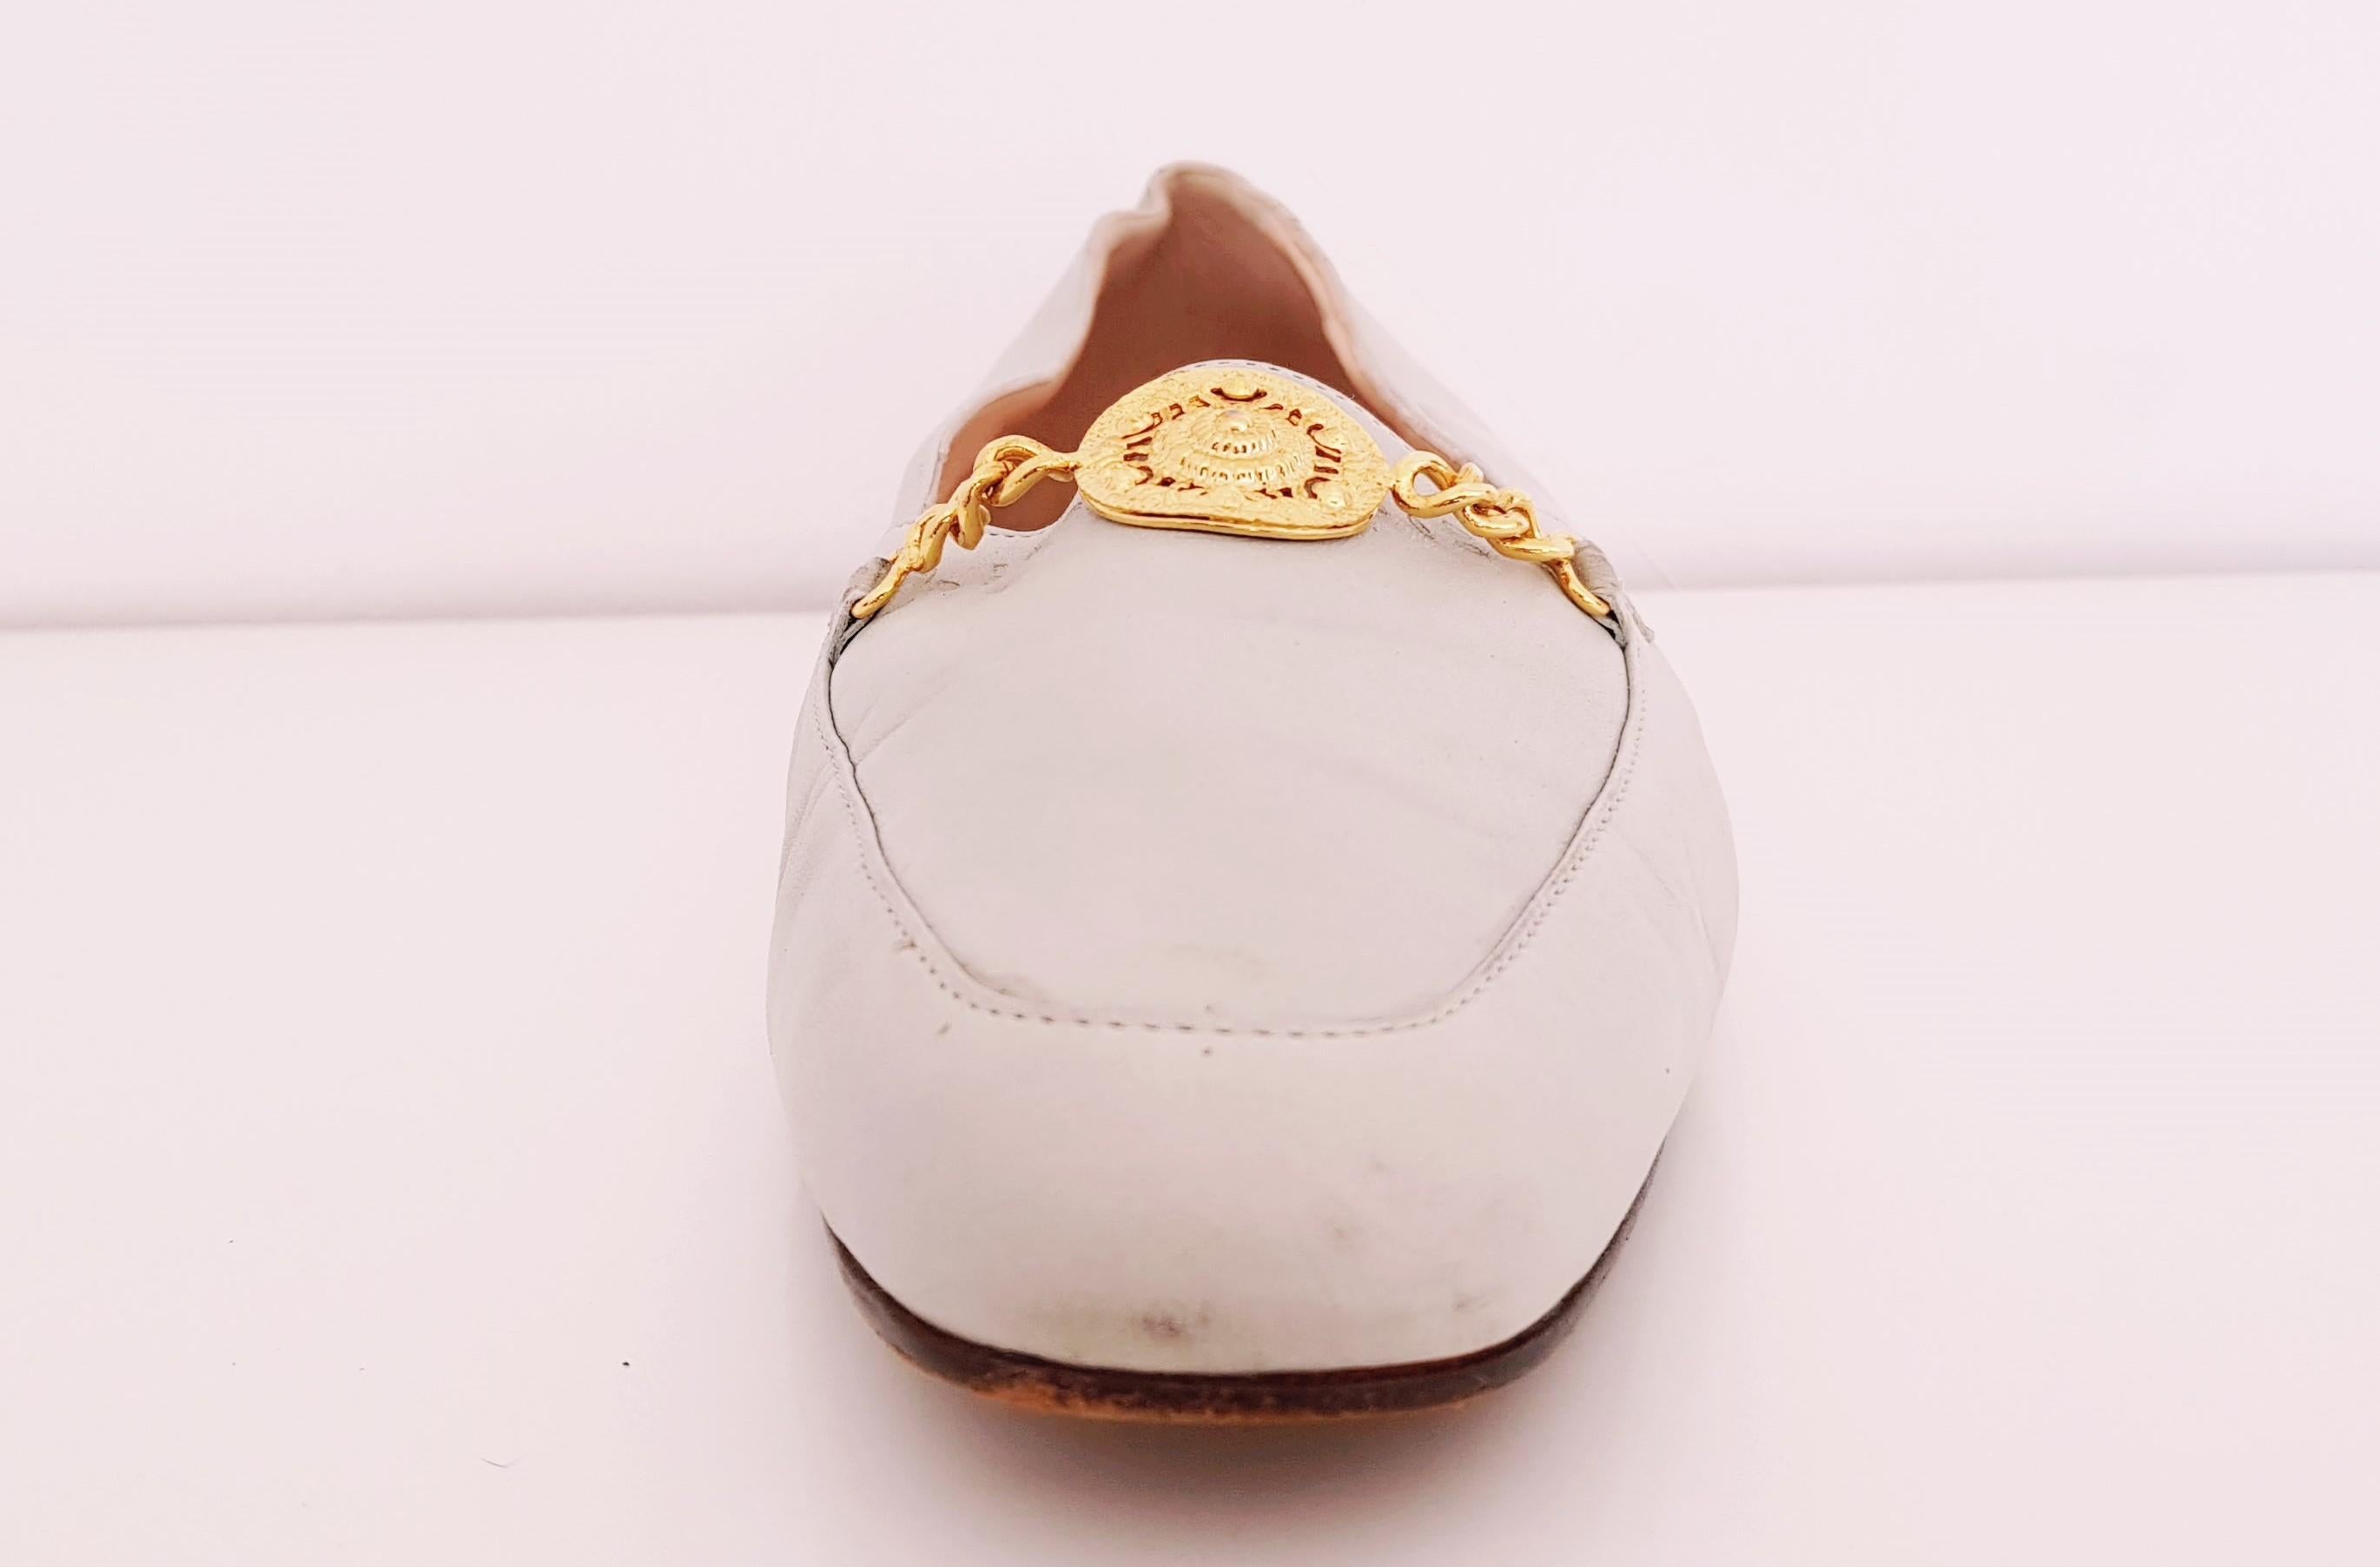 Glamour Boutique x Versace Leather Flat Ballerines with Golden Medallion.
Size: 39 1/2 (EU)
Length: 27.5 cm
Width: 8 cm
Heel height: 1 cm
Made in Italy